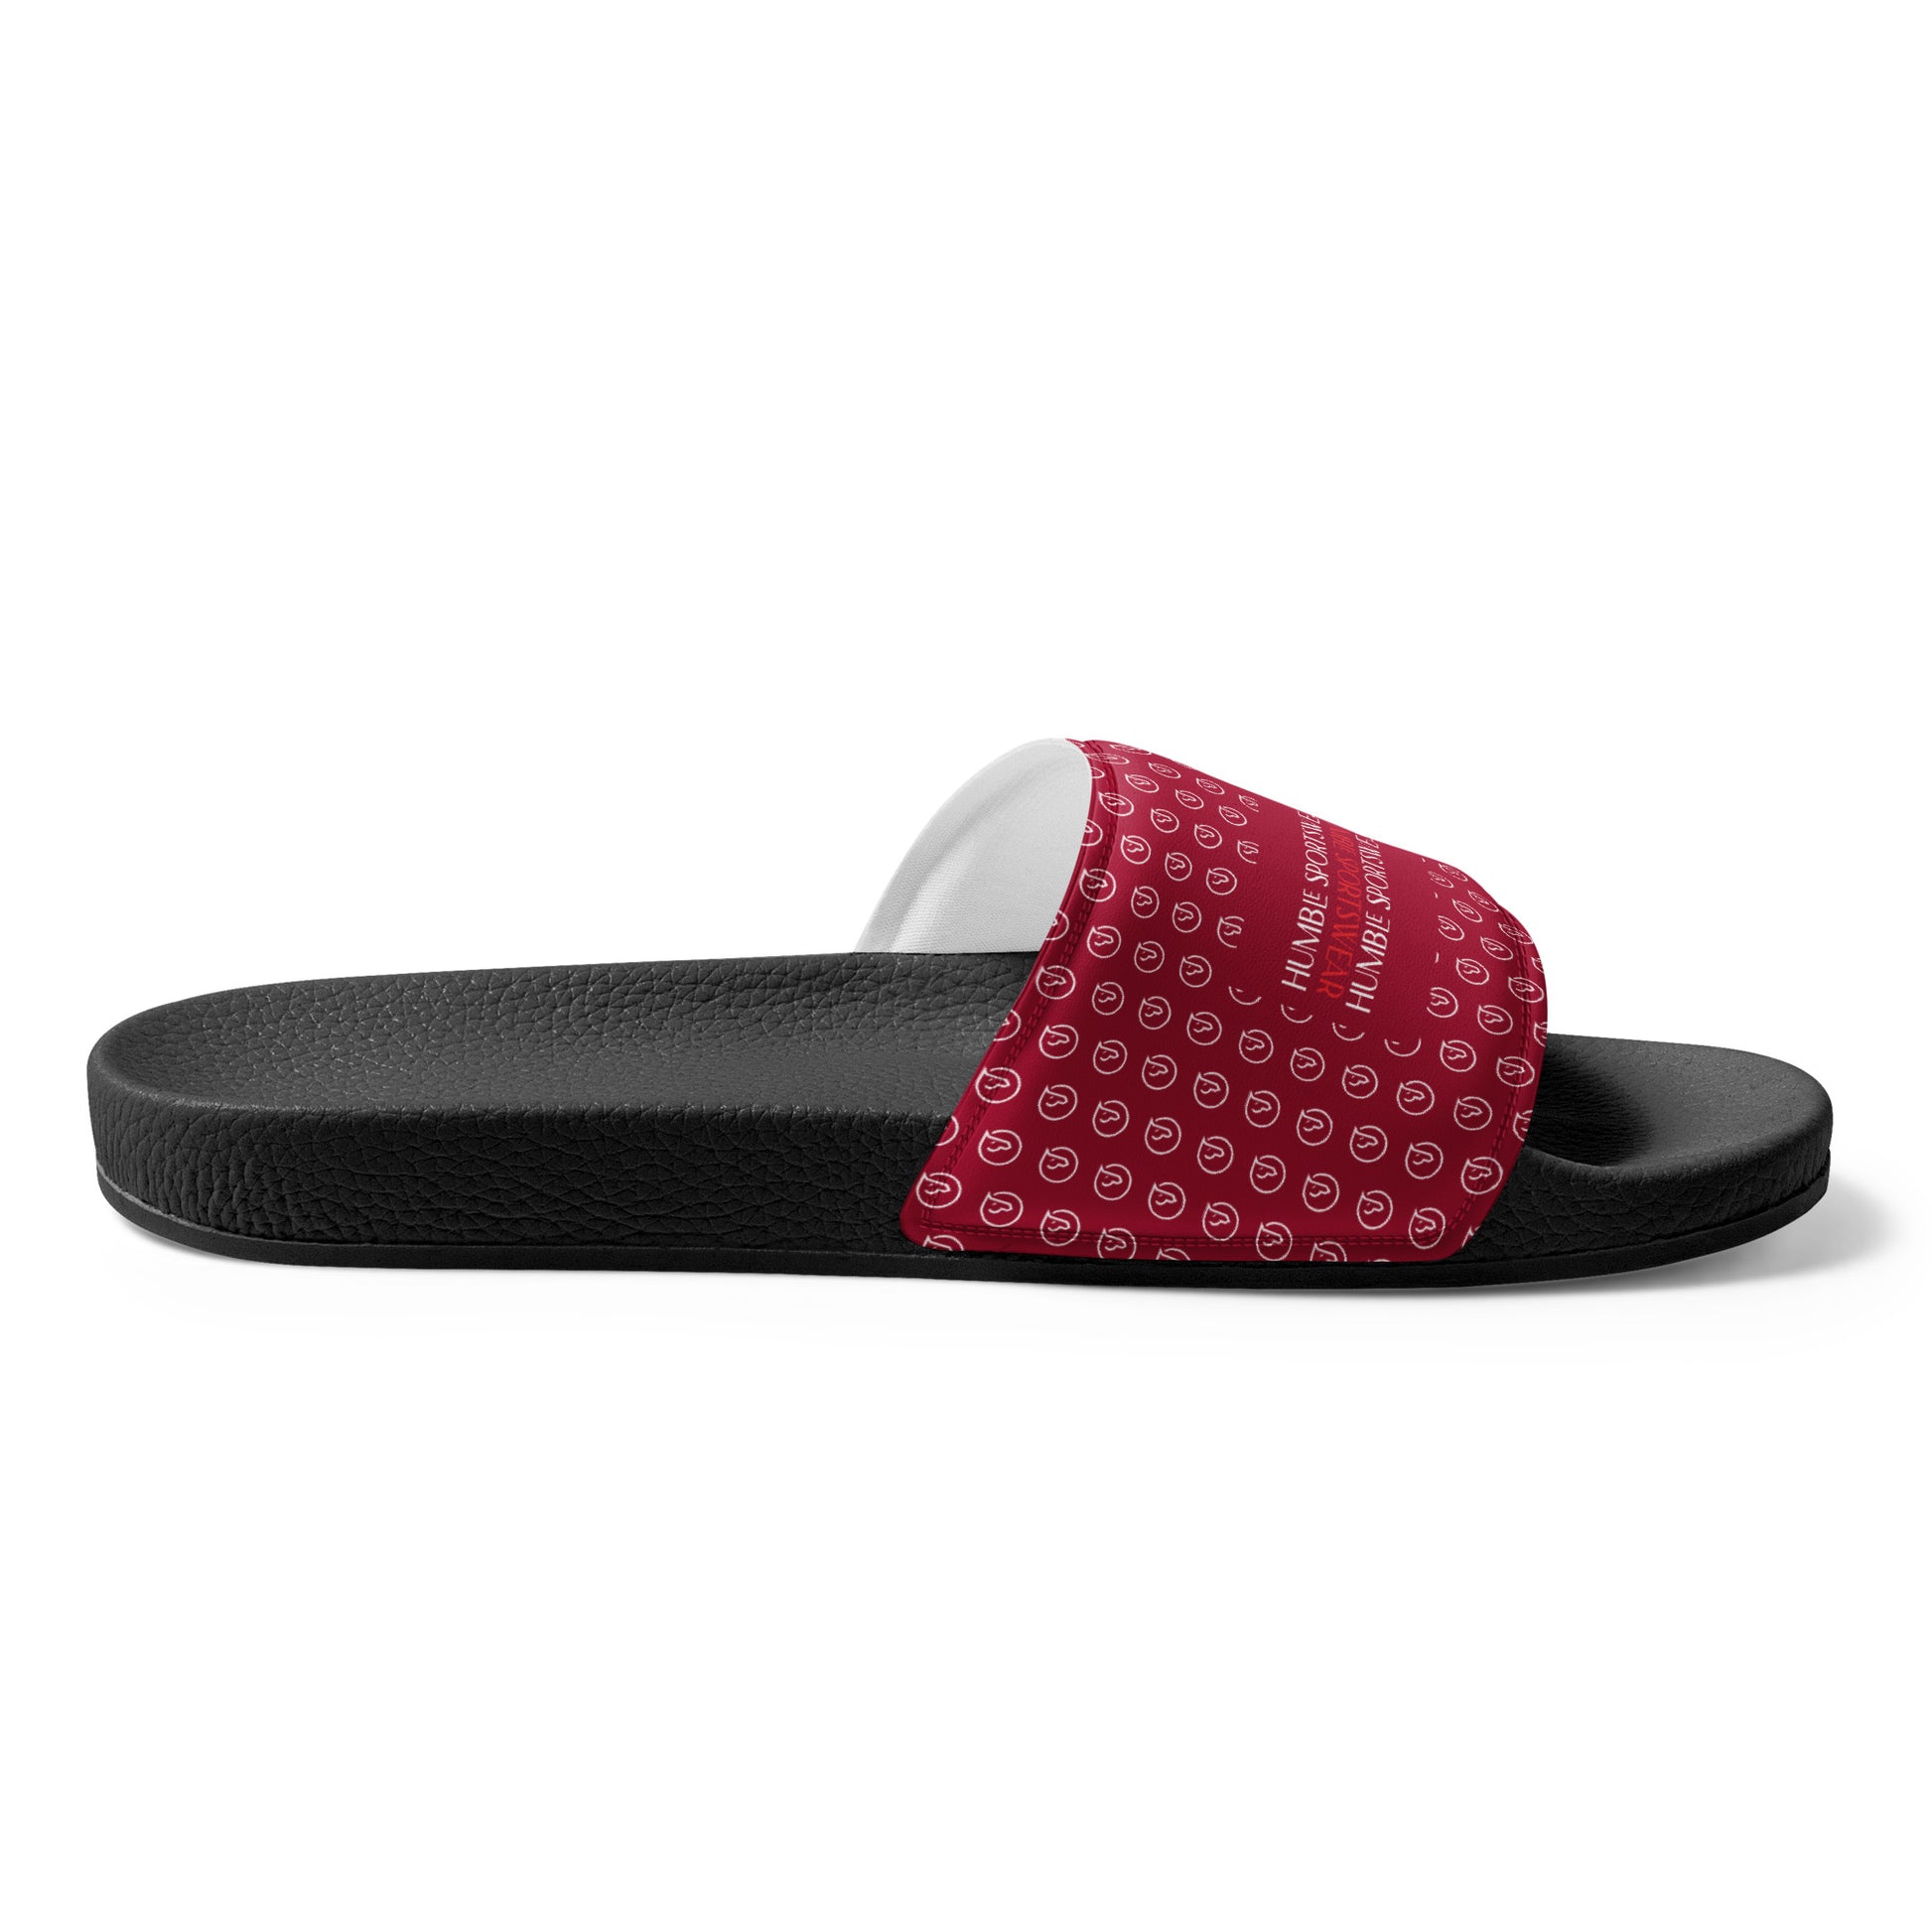 Humble Sportswear, men's Color Match casual slides sandals, red slip-on sandals 